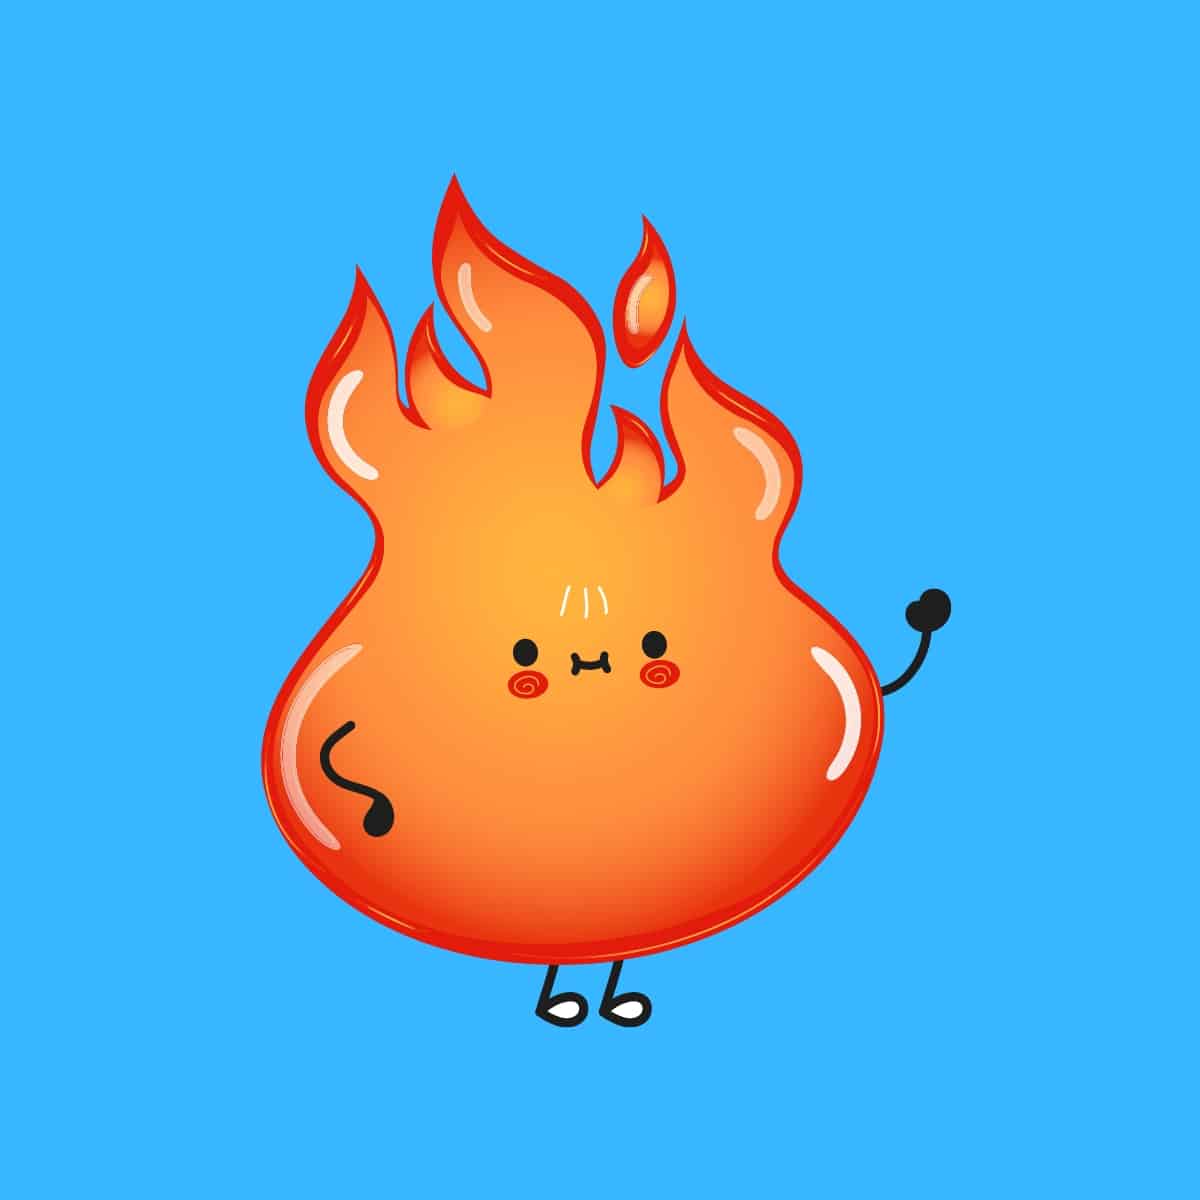 Cartoon graphic of a fire flame waving and smiling on blue background.